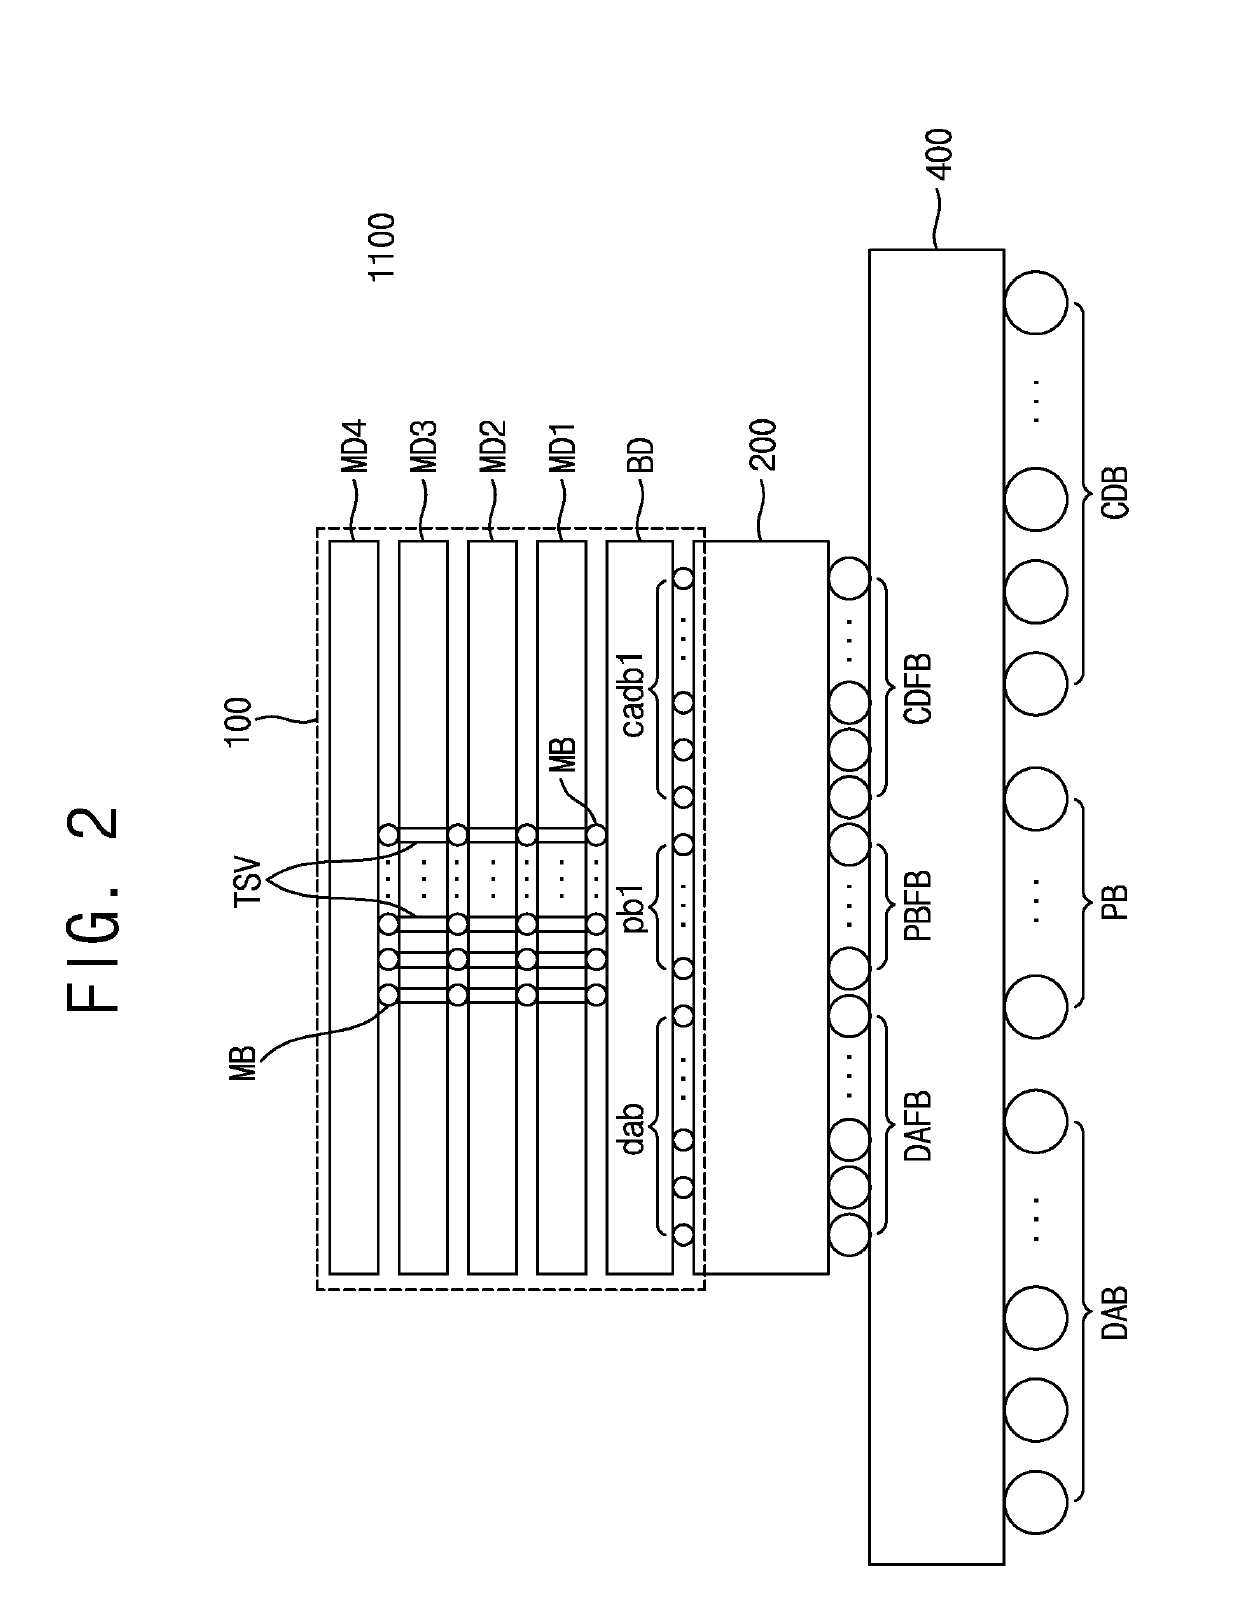 High bandwidth memory device and system device having the same